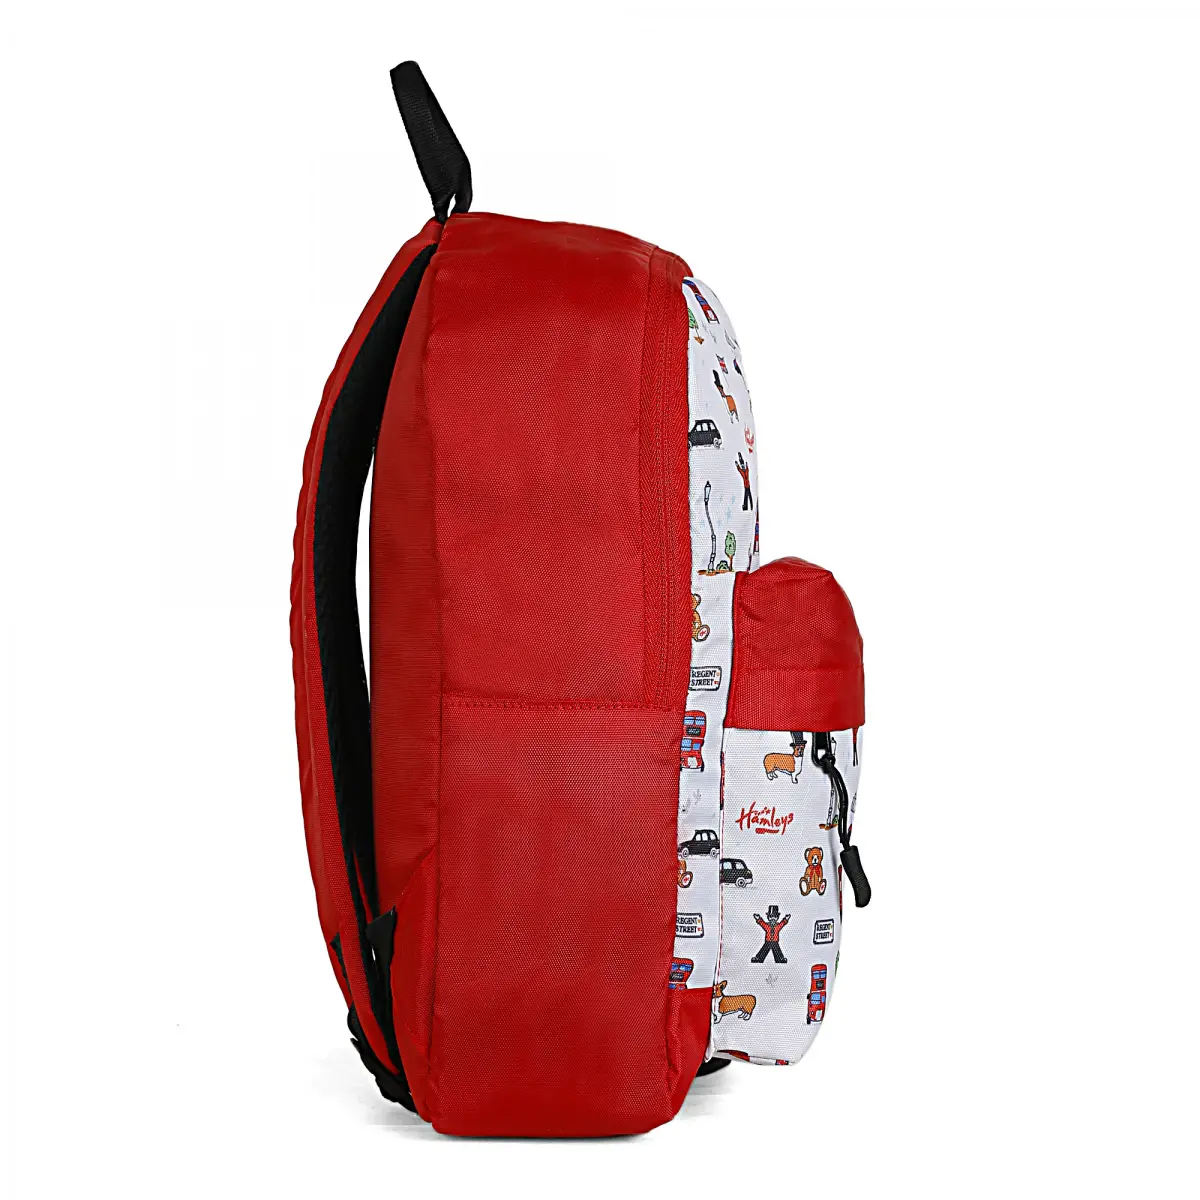 Hamleys School Bag Pack for Kids, 14Inches, Red, 12Y+